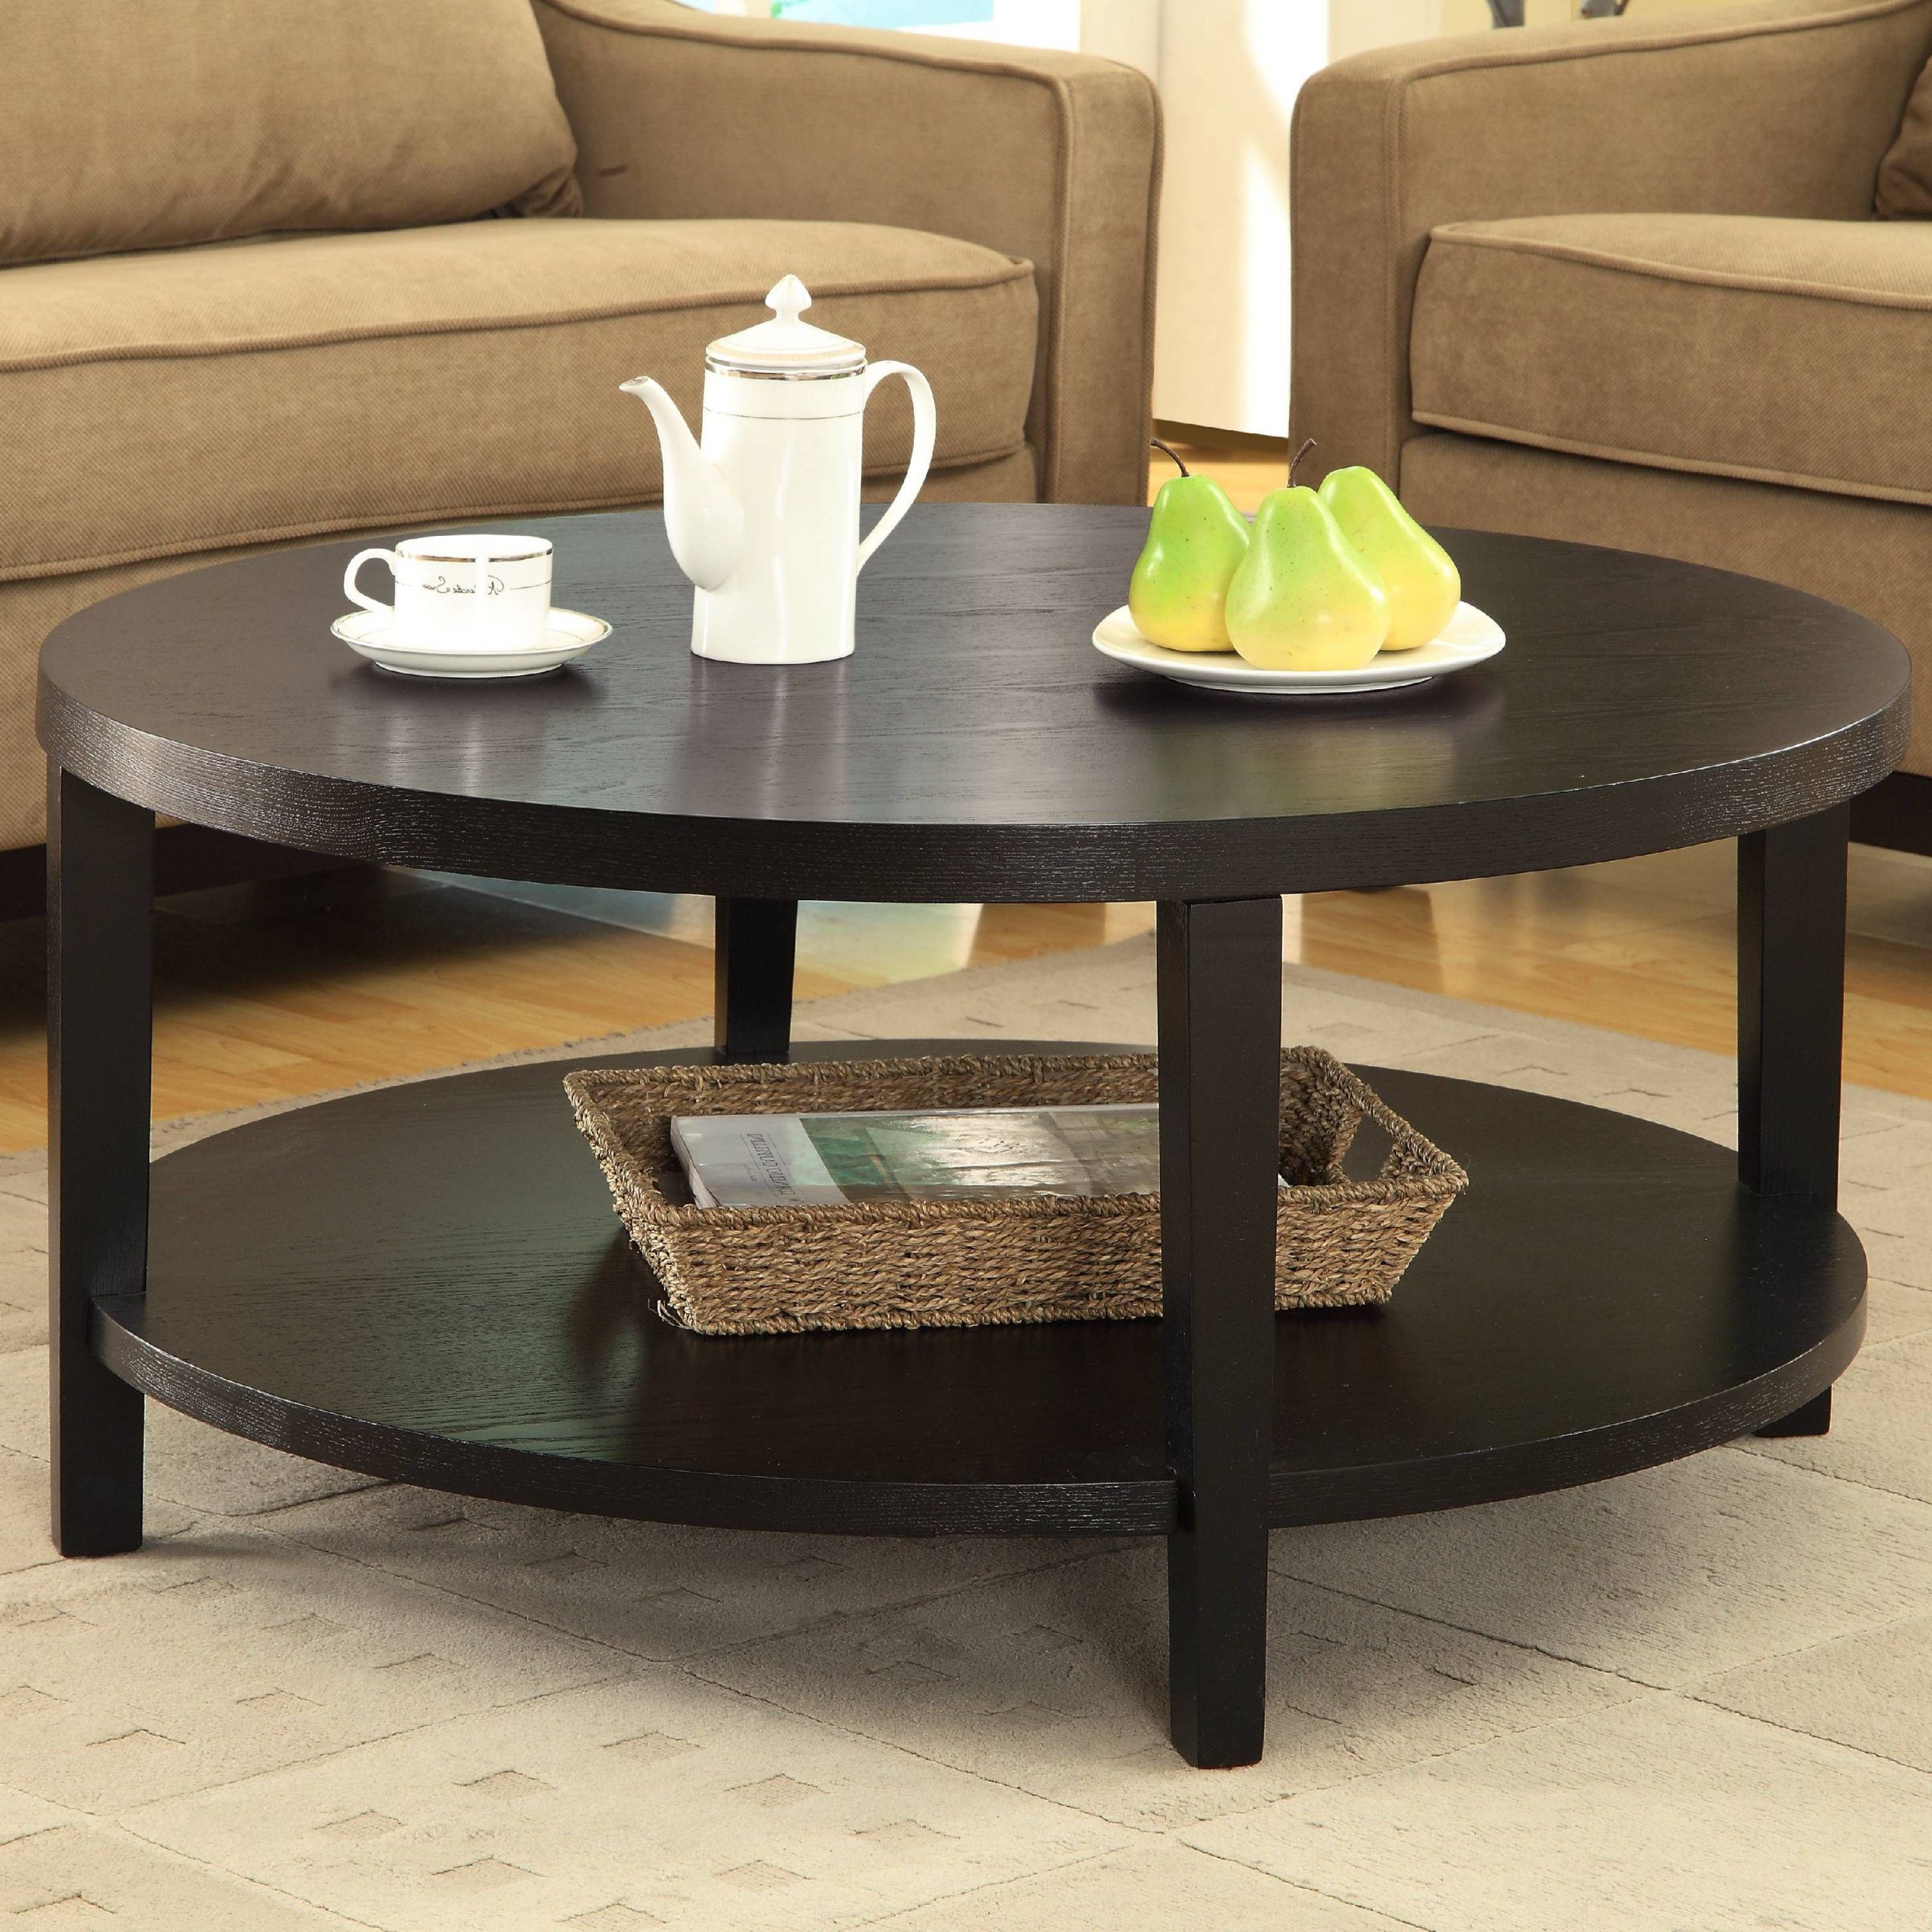 2019 Osp Home Furnishings Work Smart Merge 36" Round Coffee Throughout 2 Piece Round Coffee Tables Set (View 11 of 20)